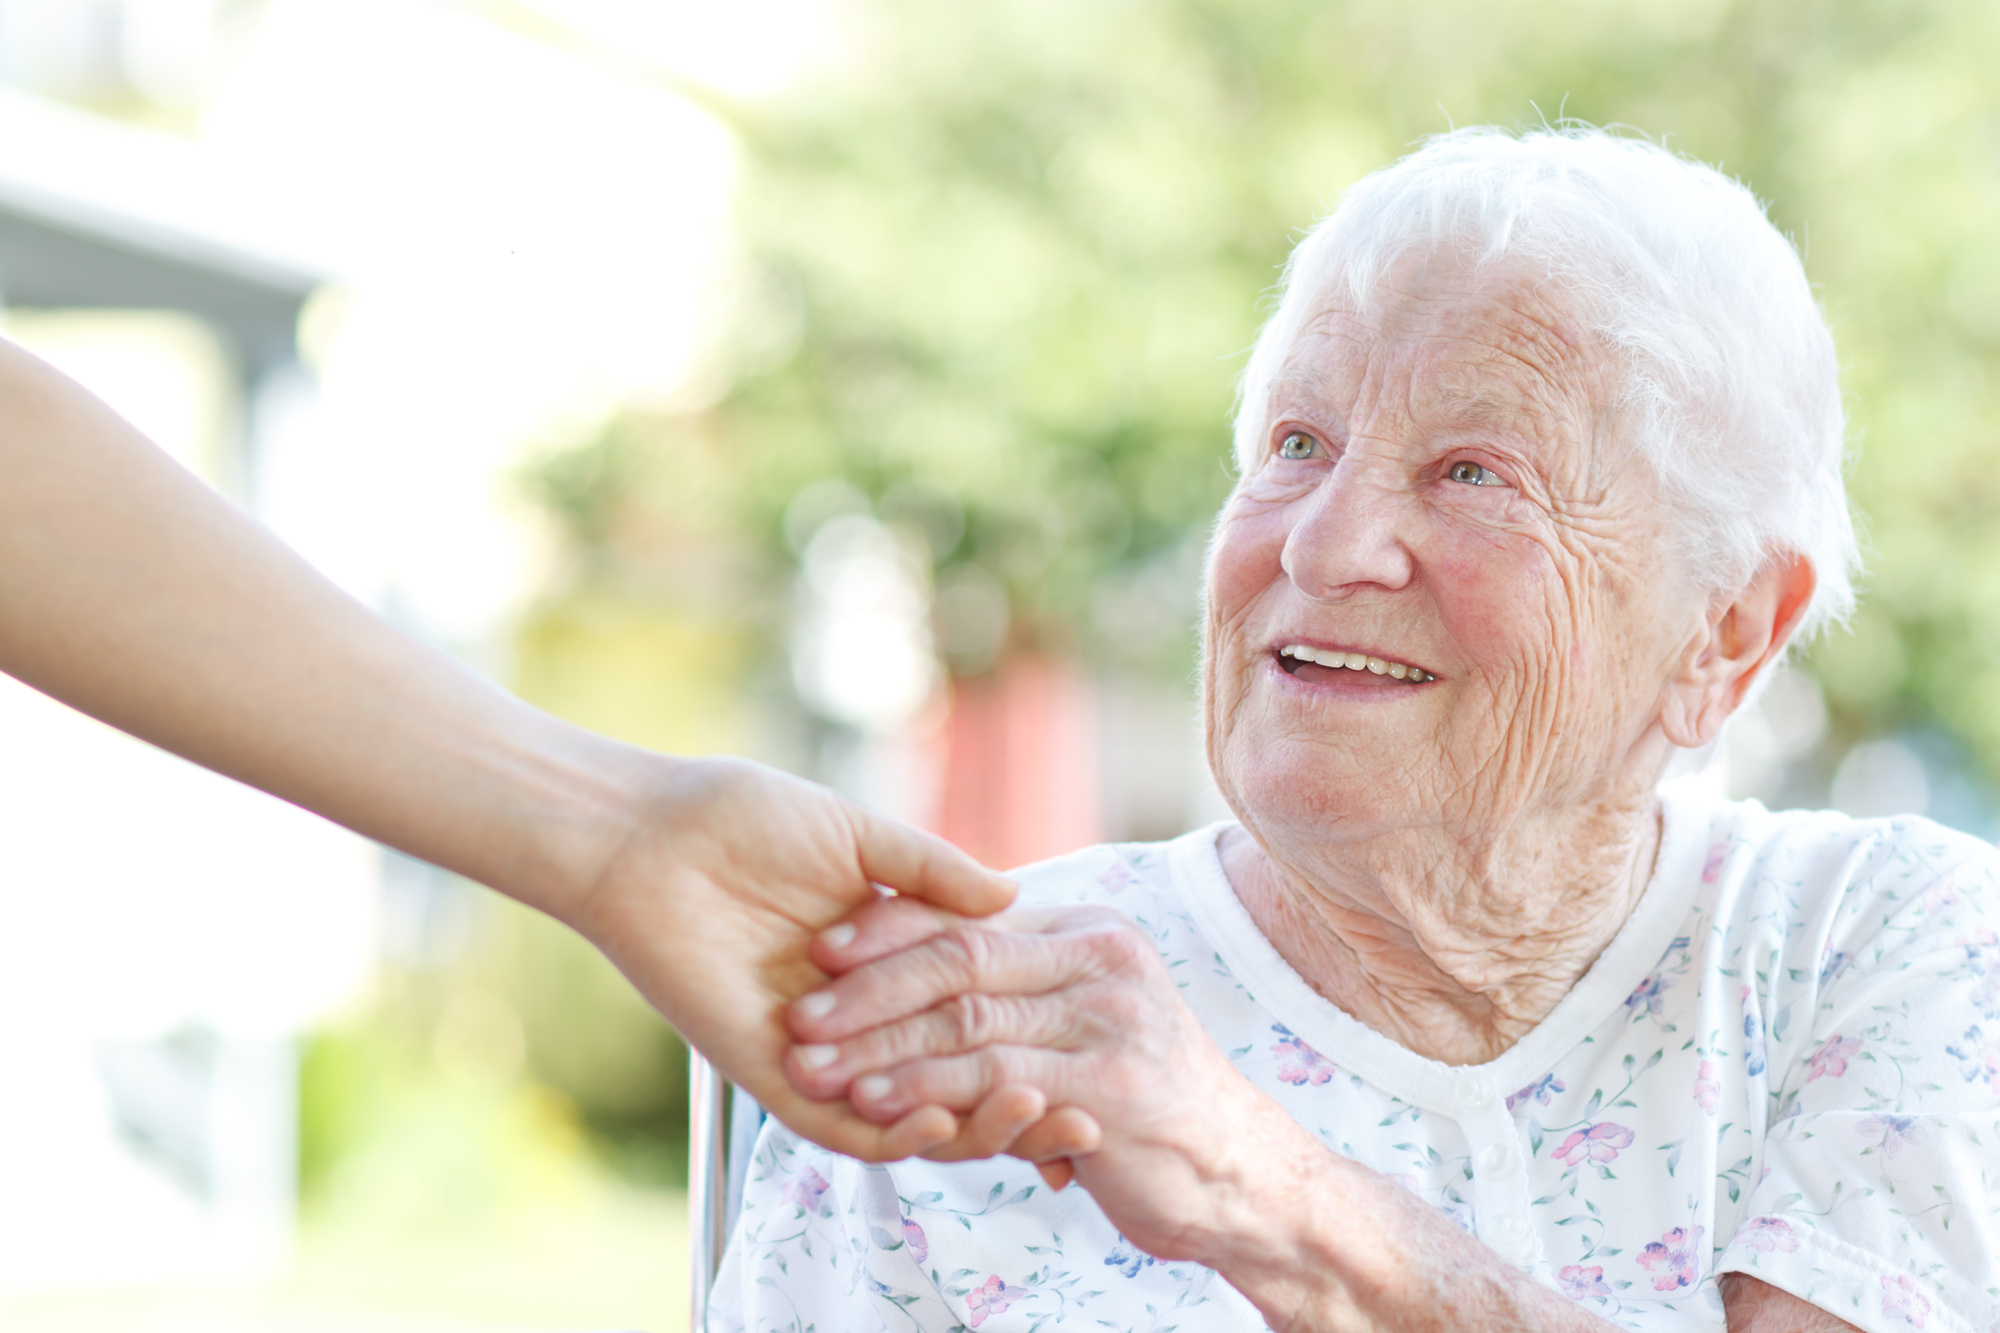 What Senior Care Services are Available for the Elderly?